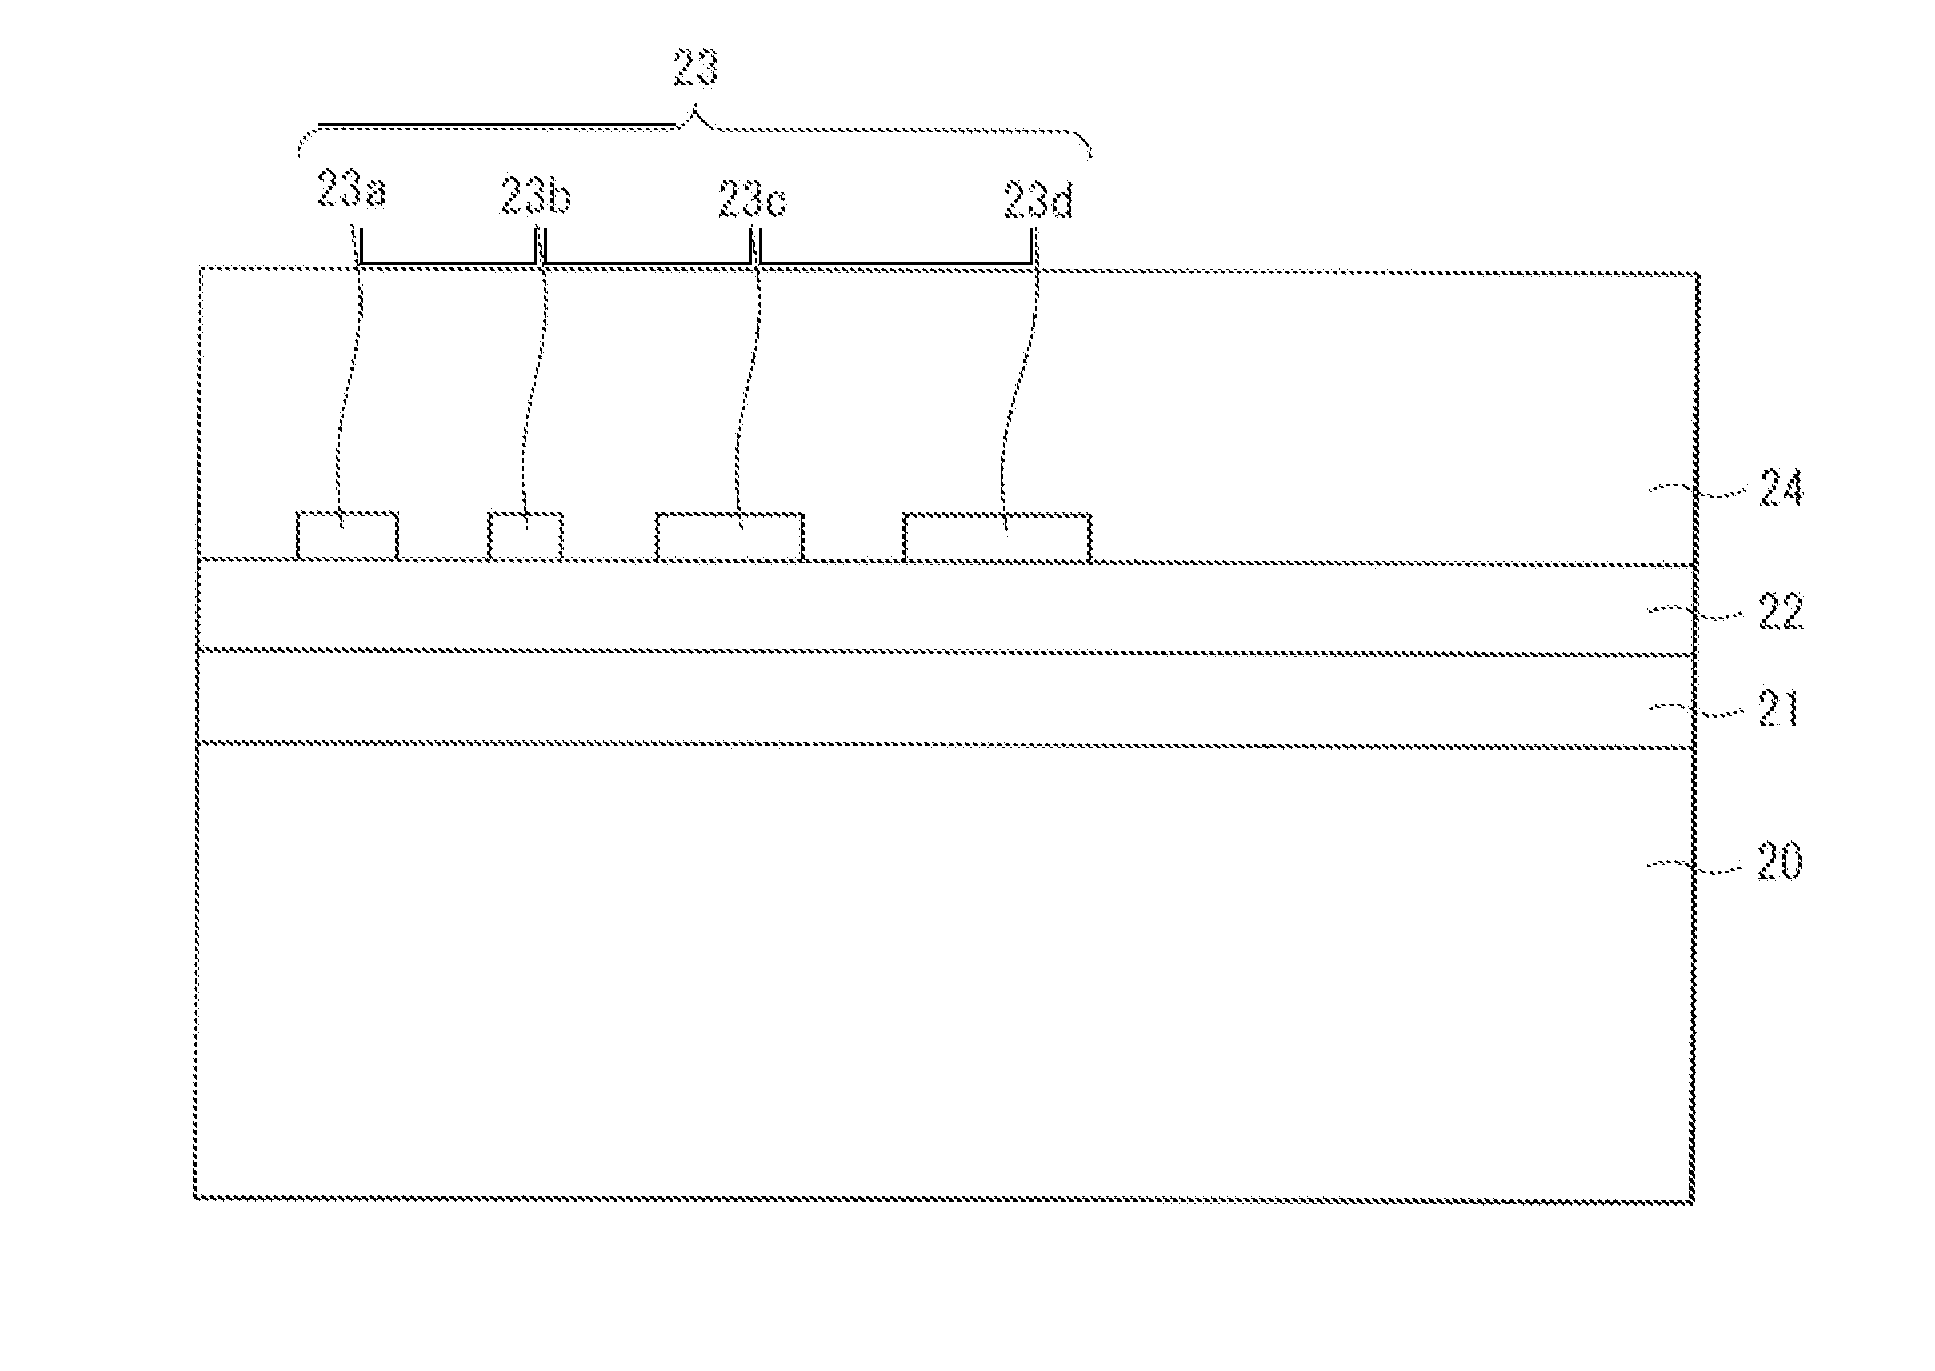 Ink for ink-jet printing, printed cylindrical containers and method for producing the same